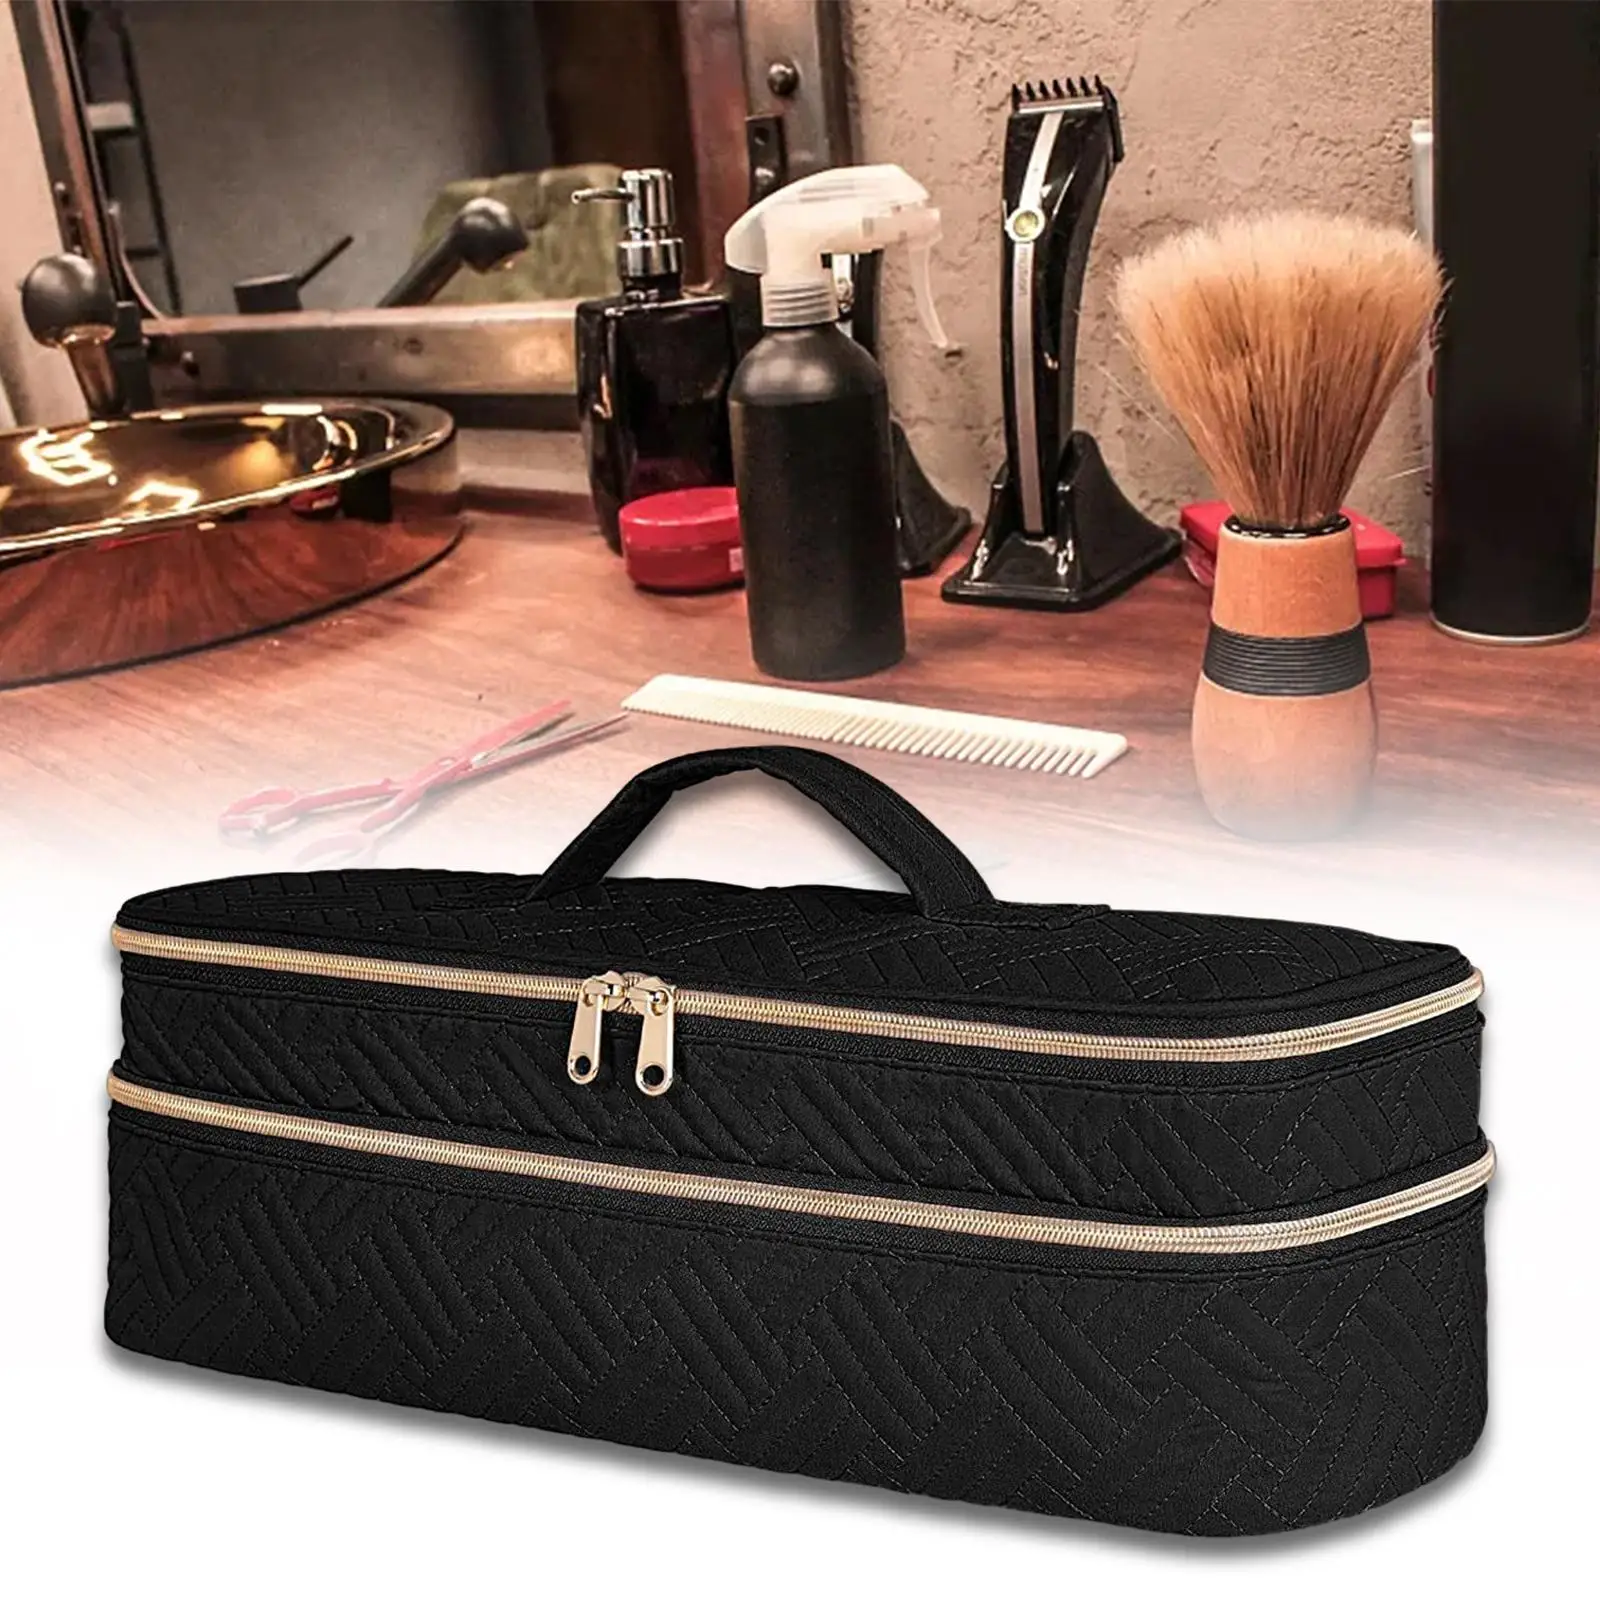 Travel Case Double Layer Professional Protection Anti Scratch Polyester Large Capacity Storage Box for A Step Hair Dryer Styler